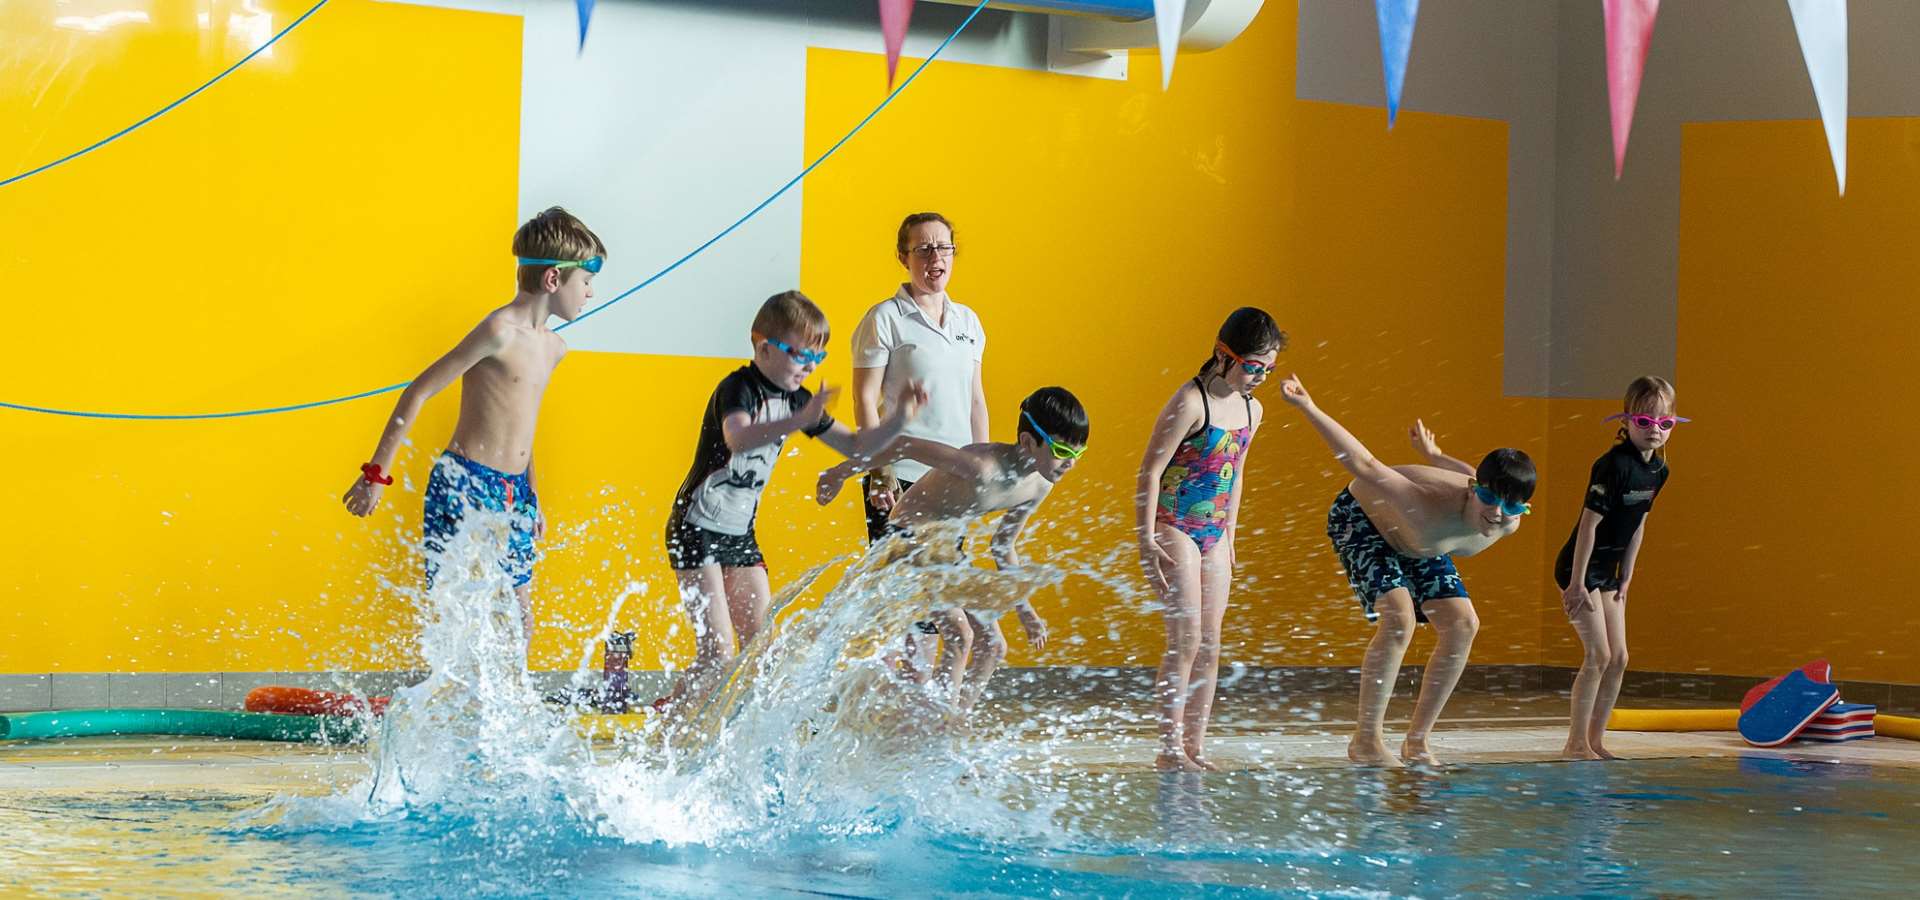 A group of children jumping into the pool